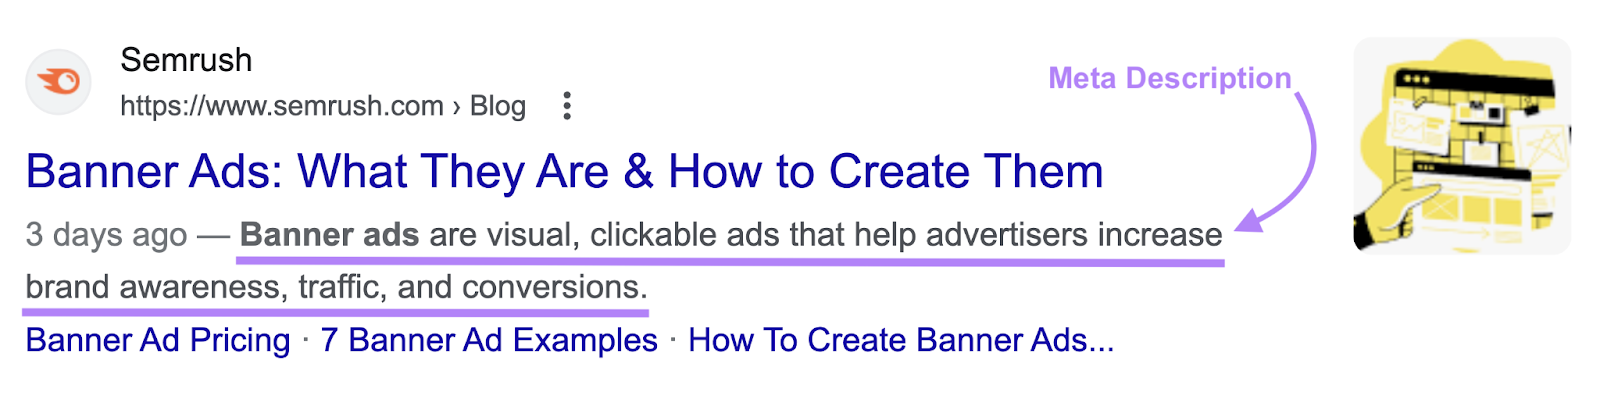 A meta description on SERP that reads "Banner ads are visual, clickable ads that help advertisers increase brand awareness, traffic, and conversions."